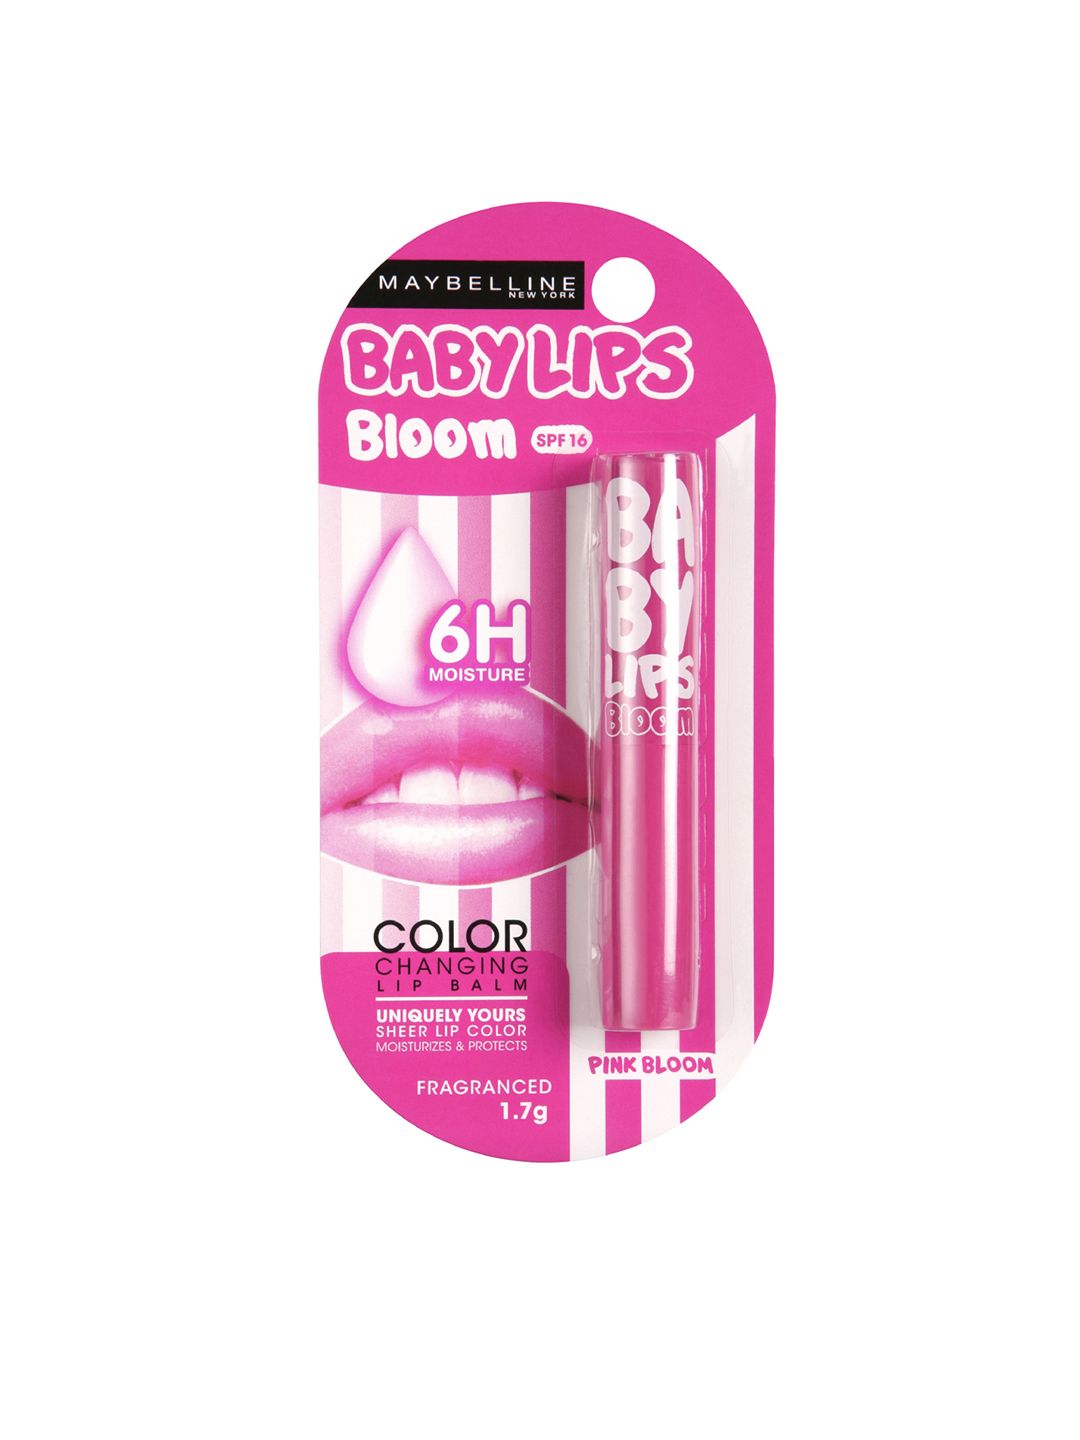 Maybelline Lip Smooth Color Changing Lip Balm - Pink Bloom 1.7g Price in India